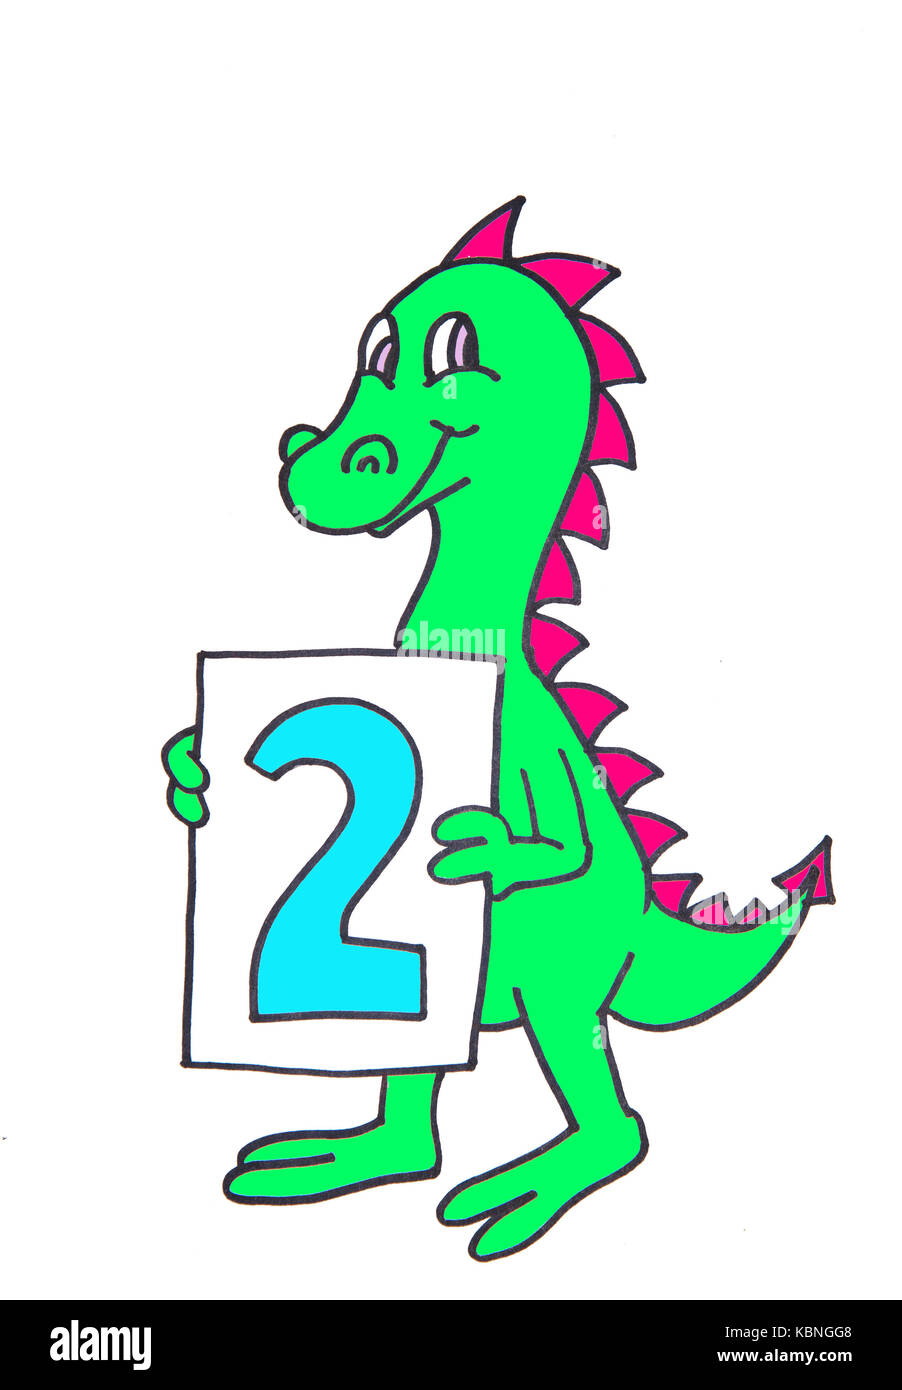 Baby dragon showing number two. Illustration. Stock Photo